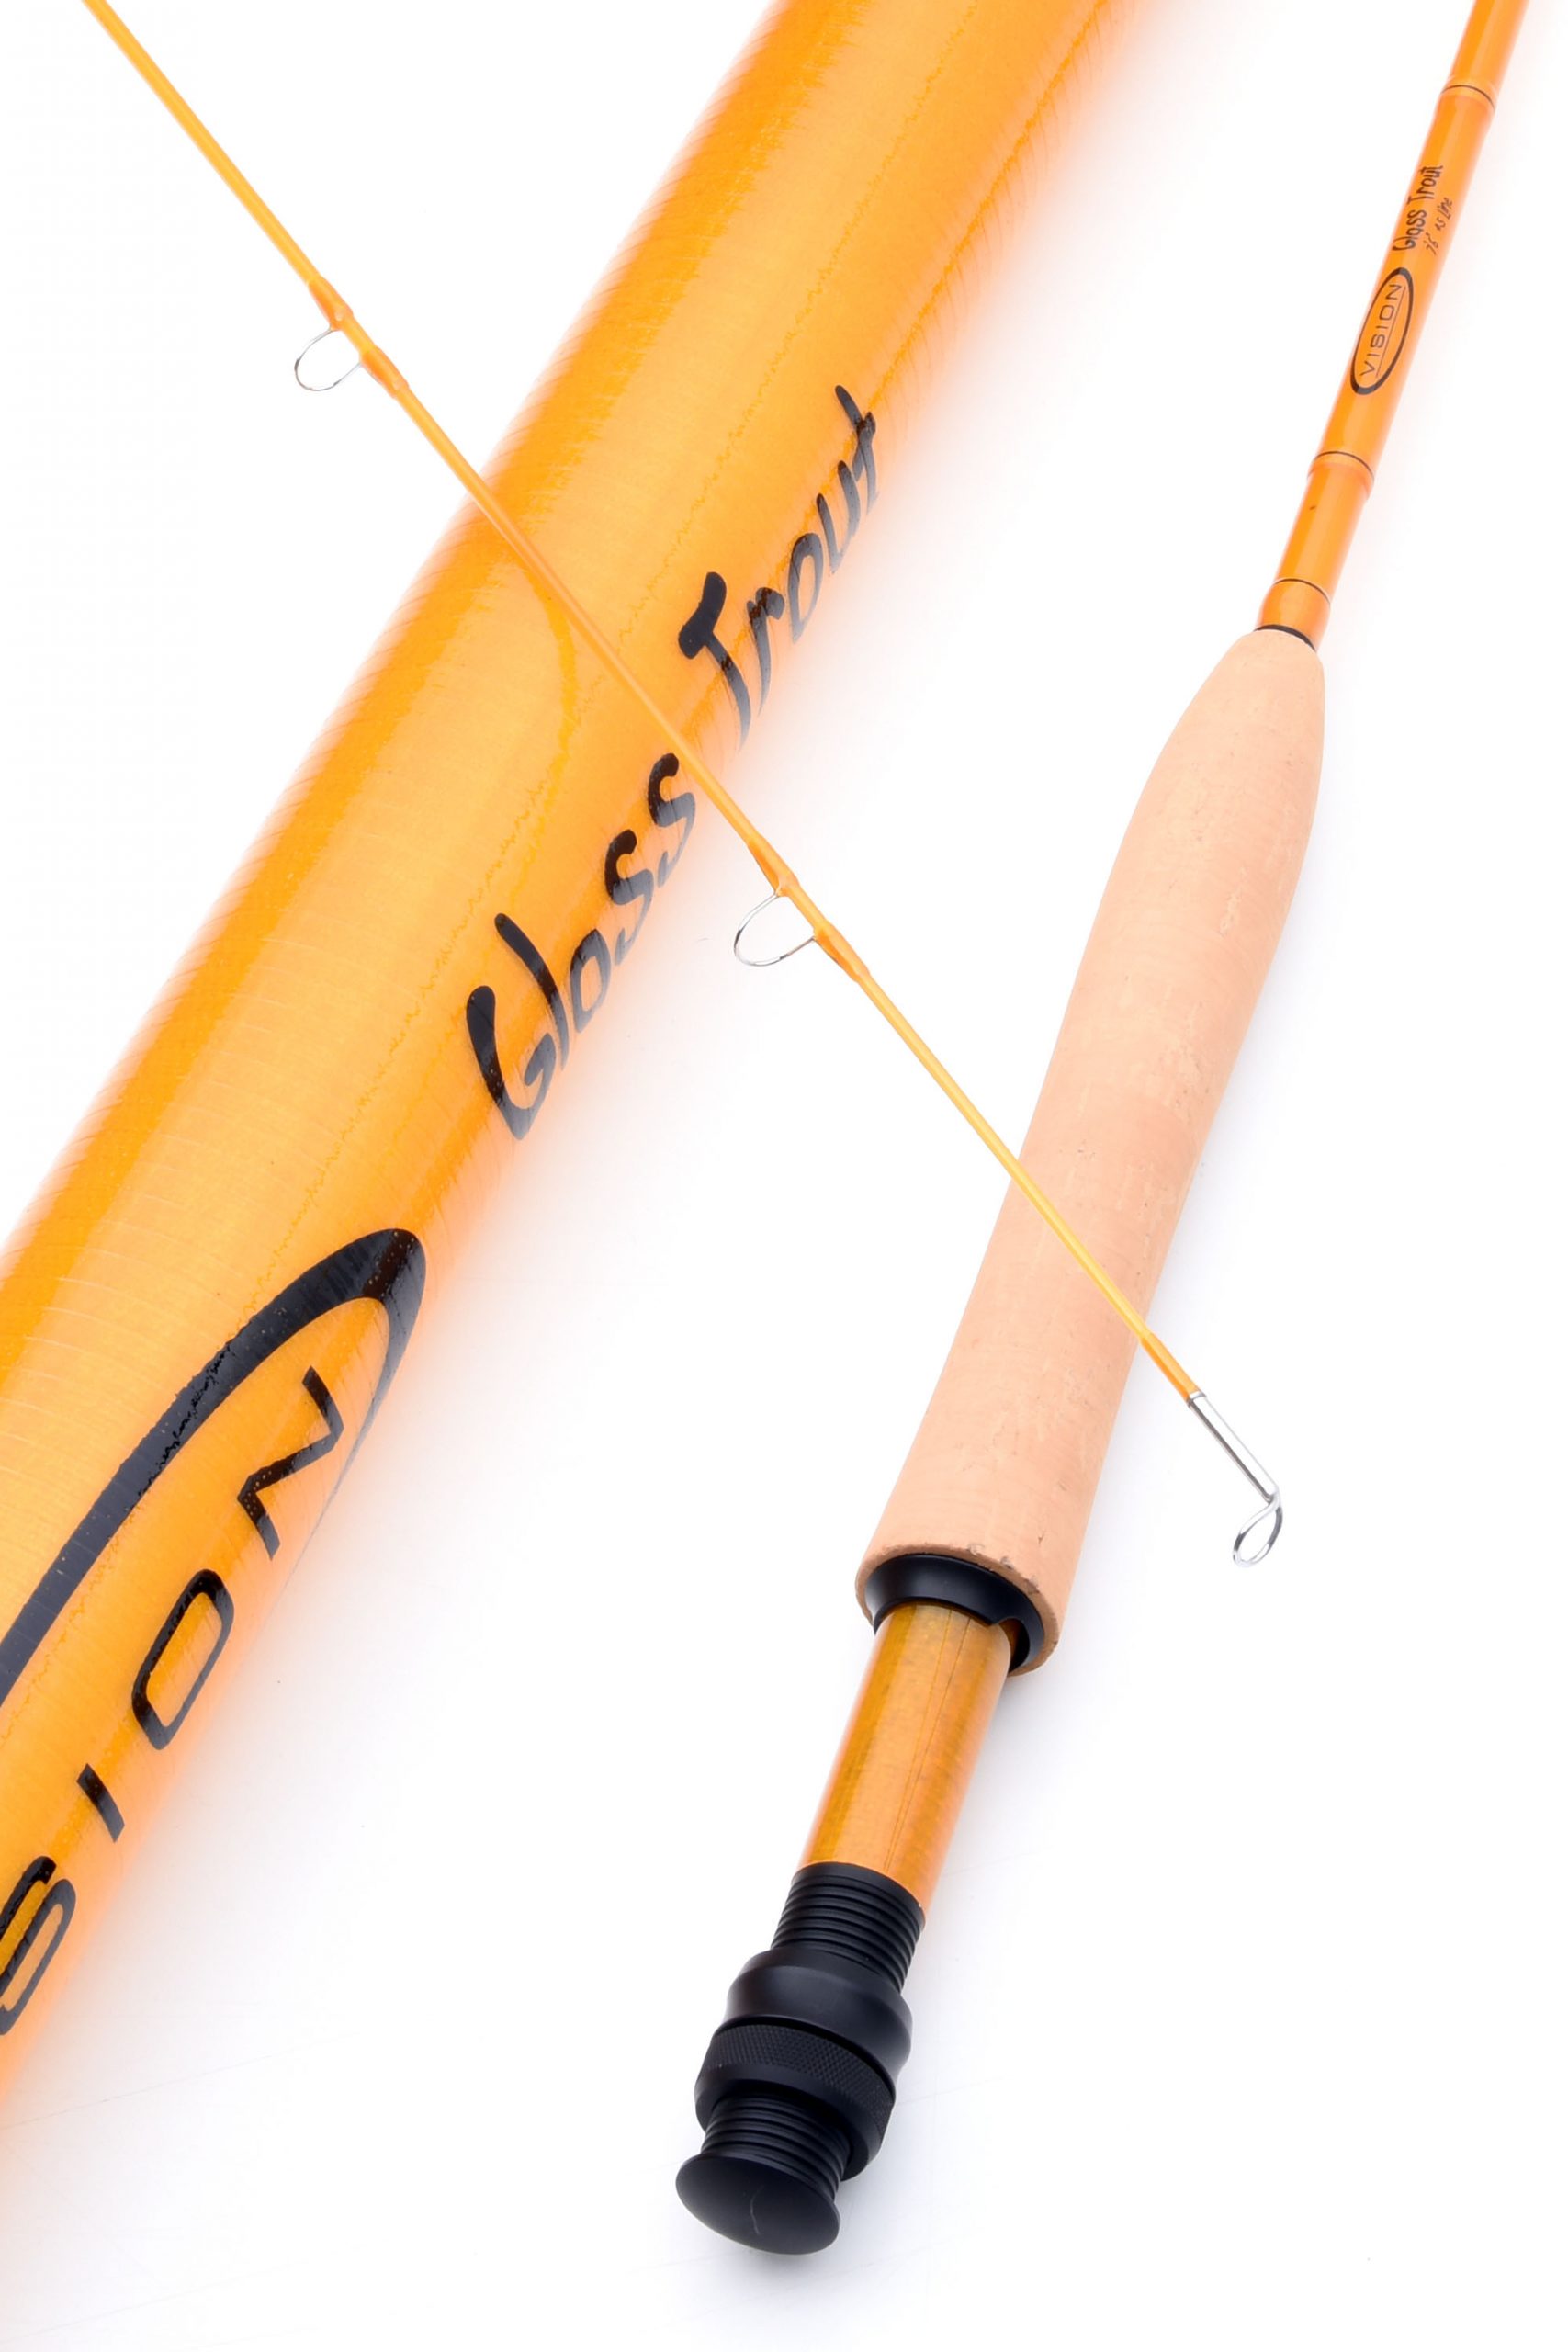 Vision Glass Trout Fly Rod 7 Foot 6'' #5 For Fly Fishing (Length 7ft 6in / 2.28m)